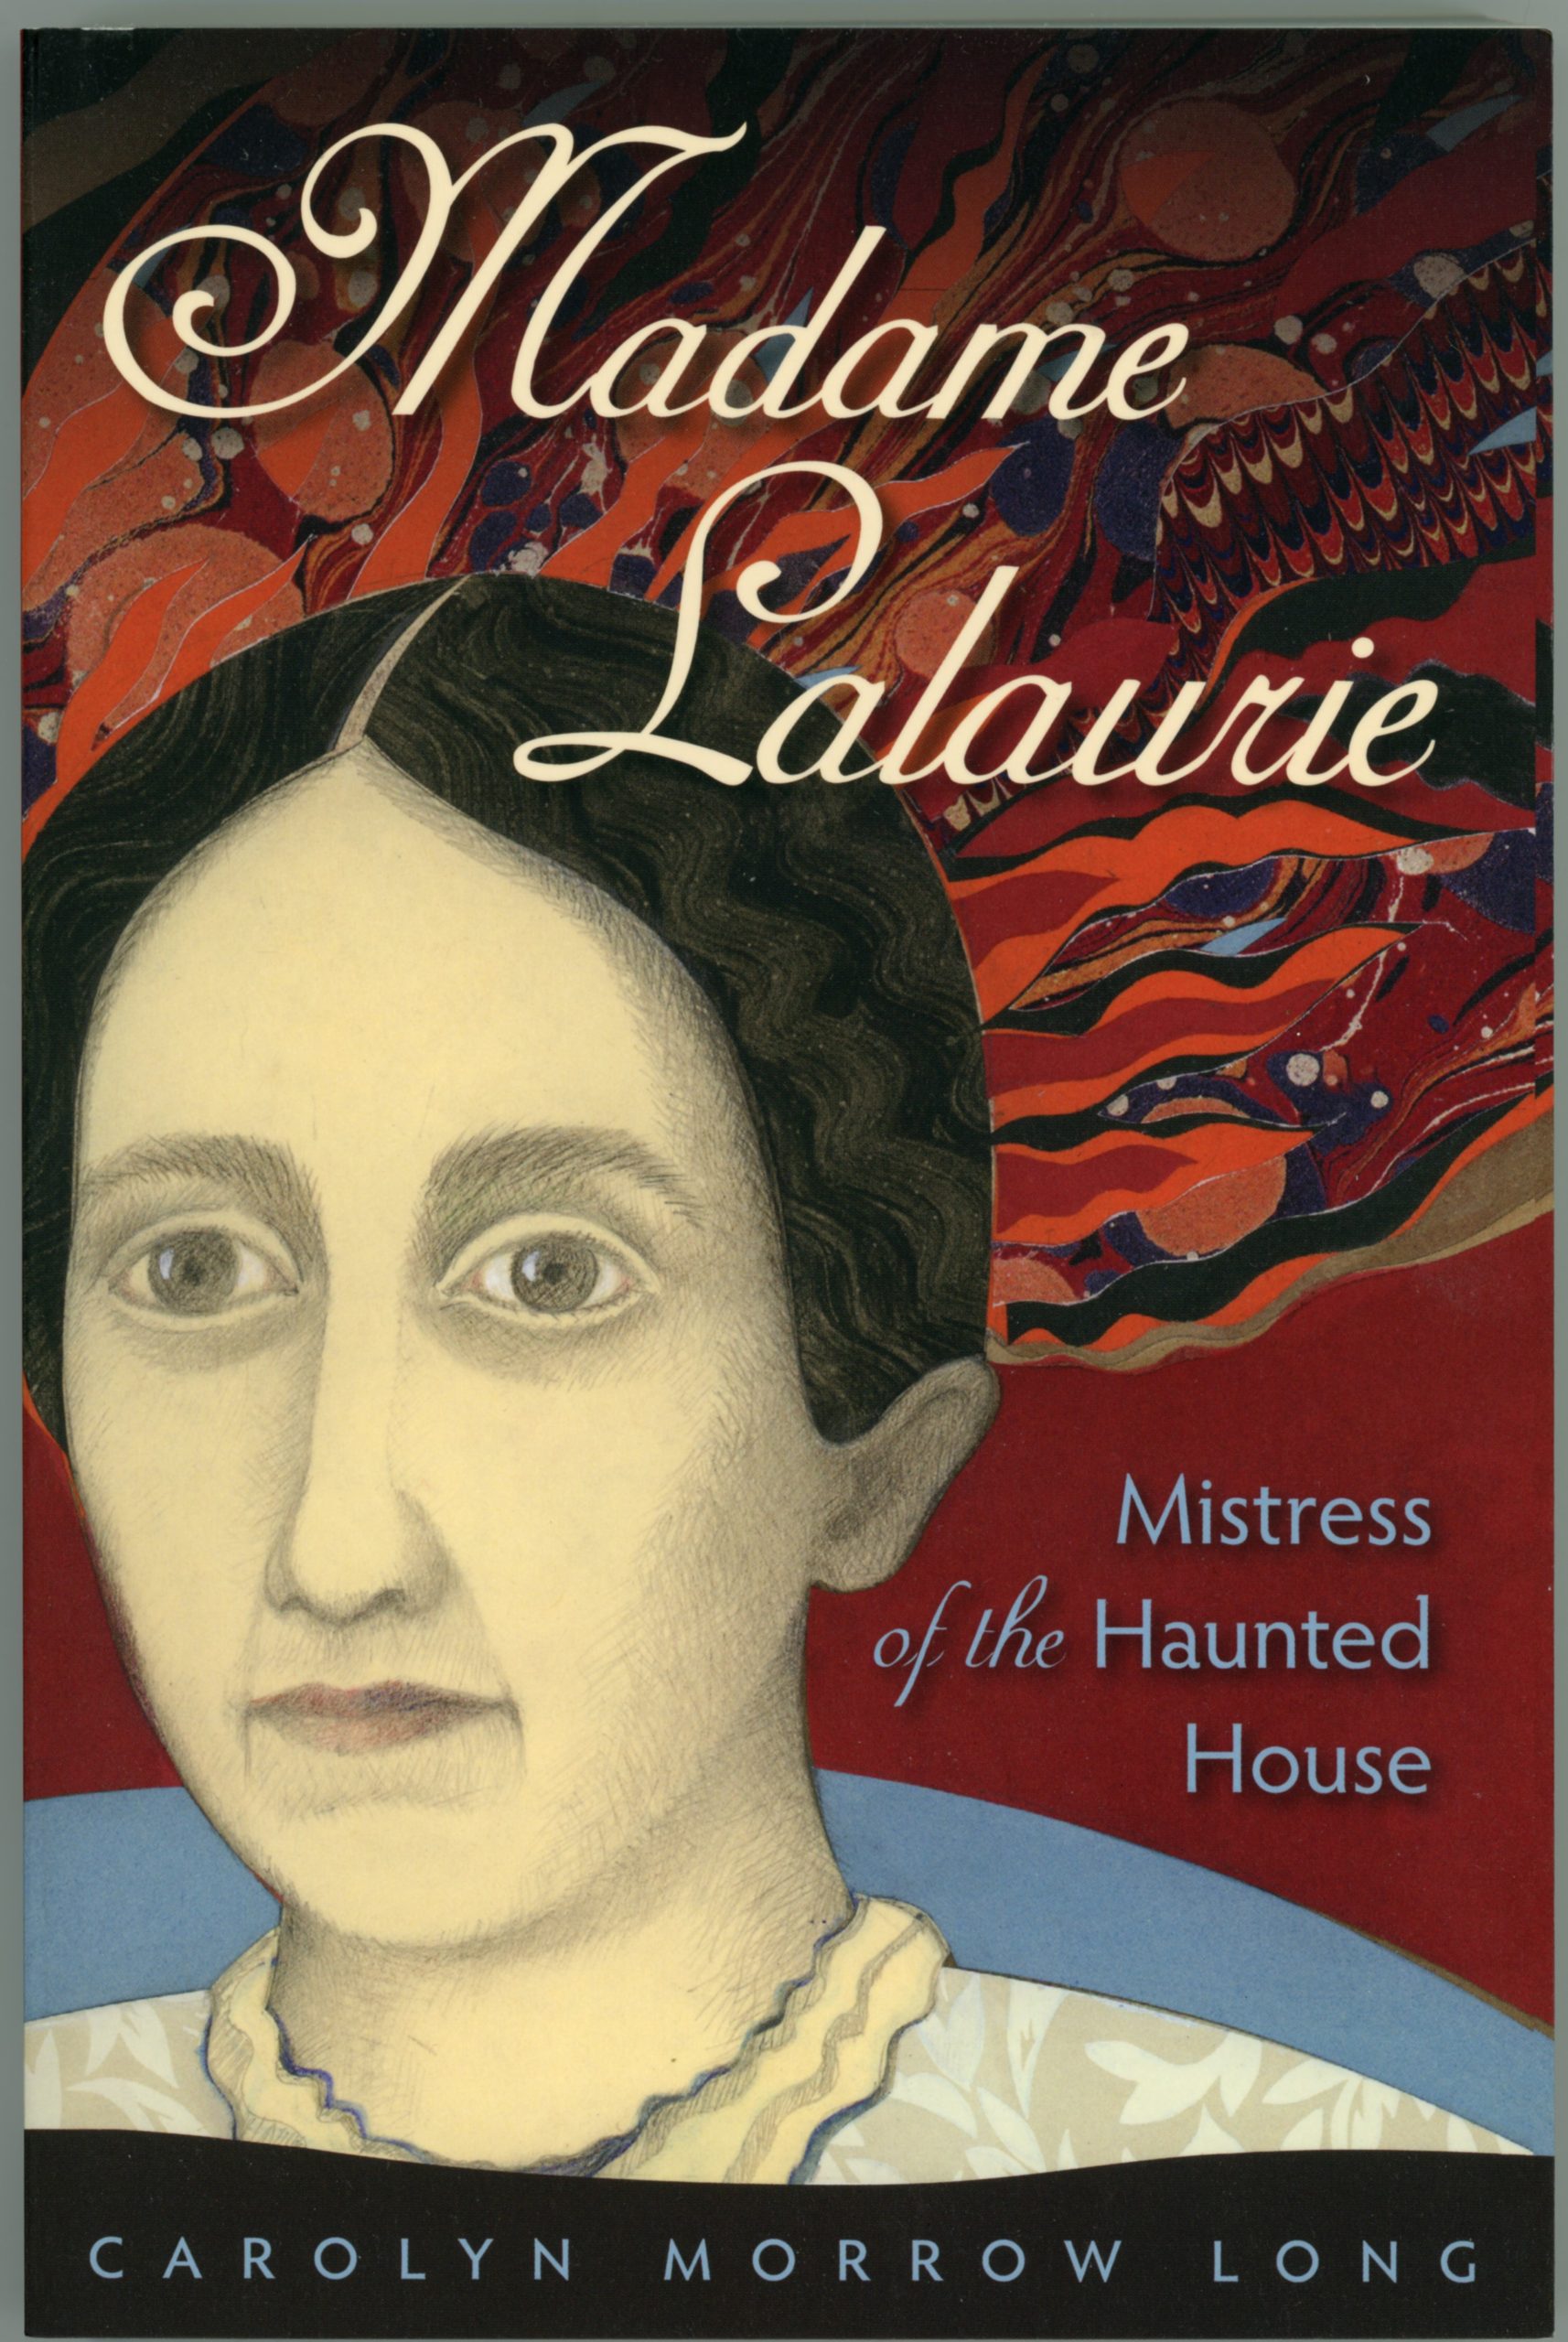 2012 Madame Lalaurie front cover